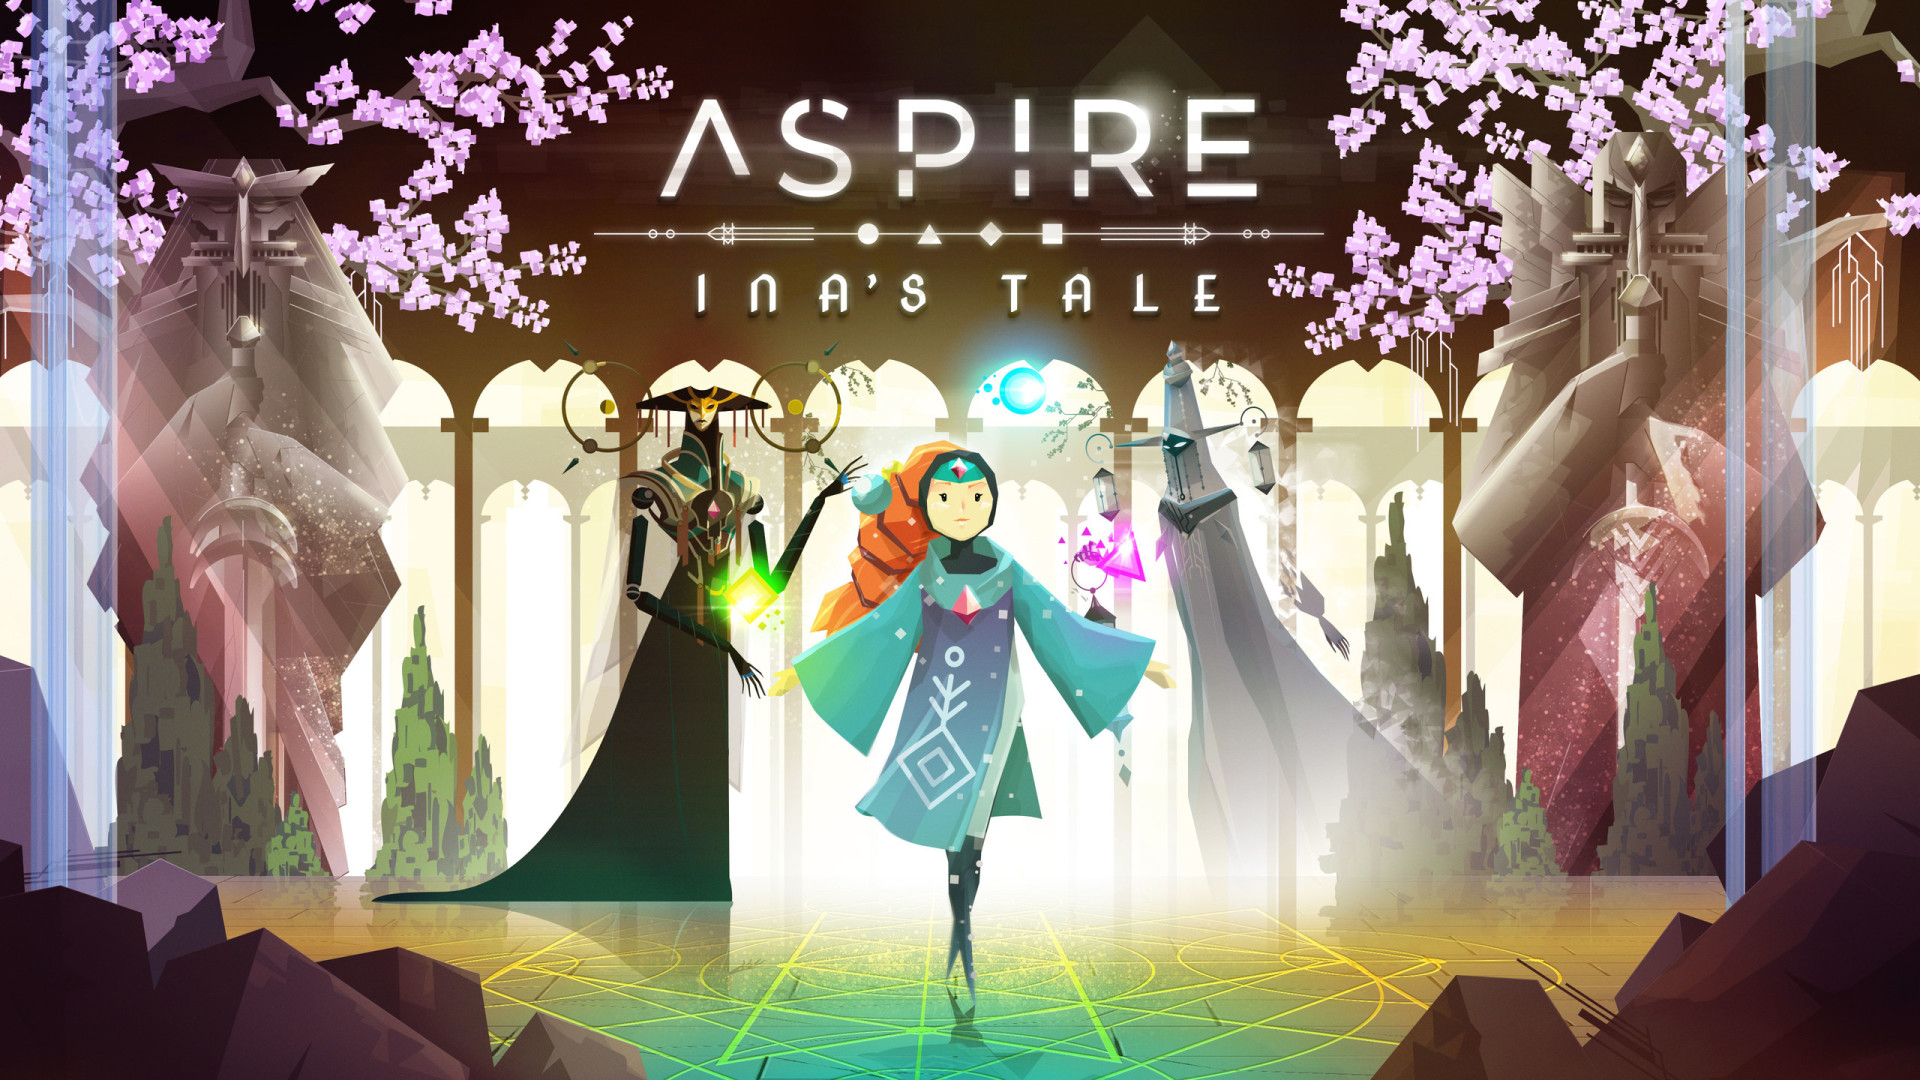 Video Game Aspire: Ina's Tale HD Wallpaper | Background Image